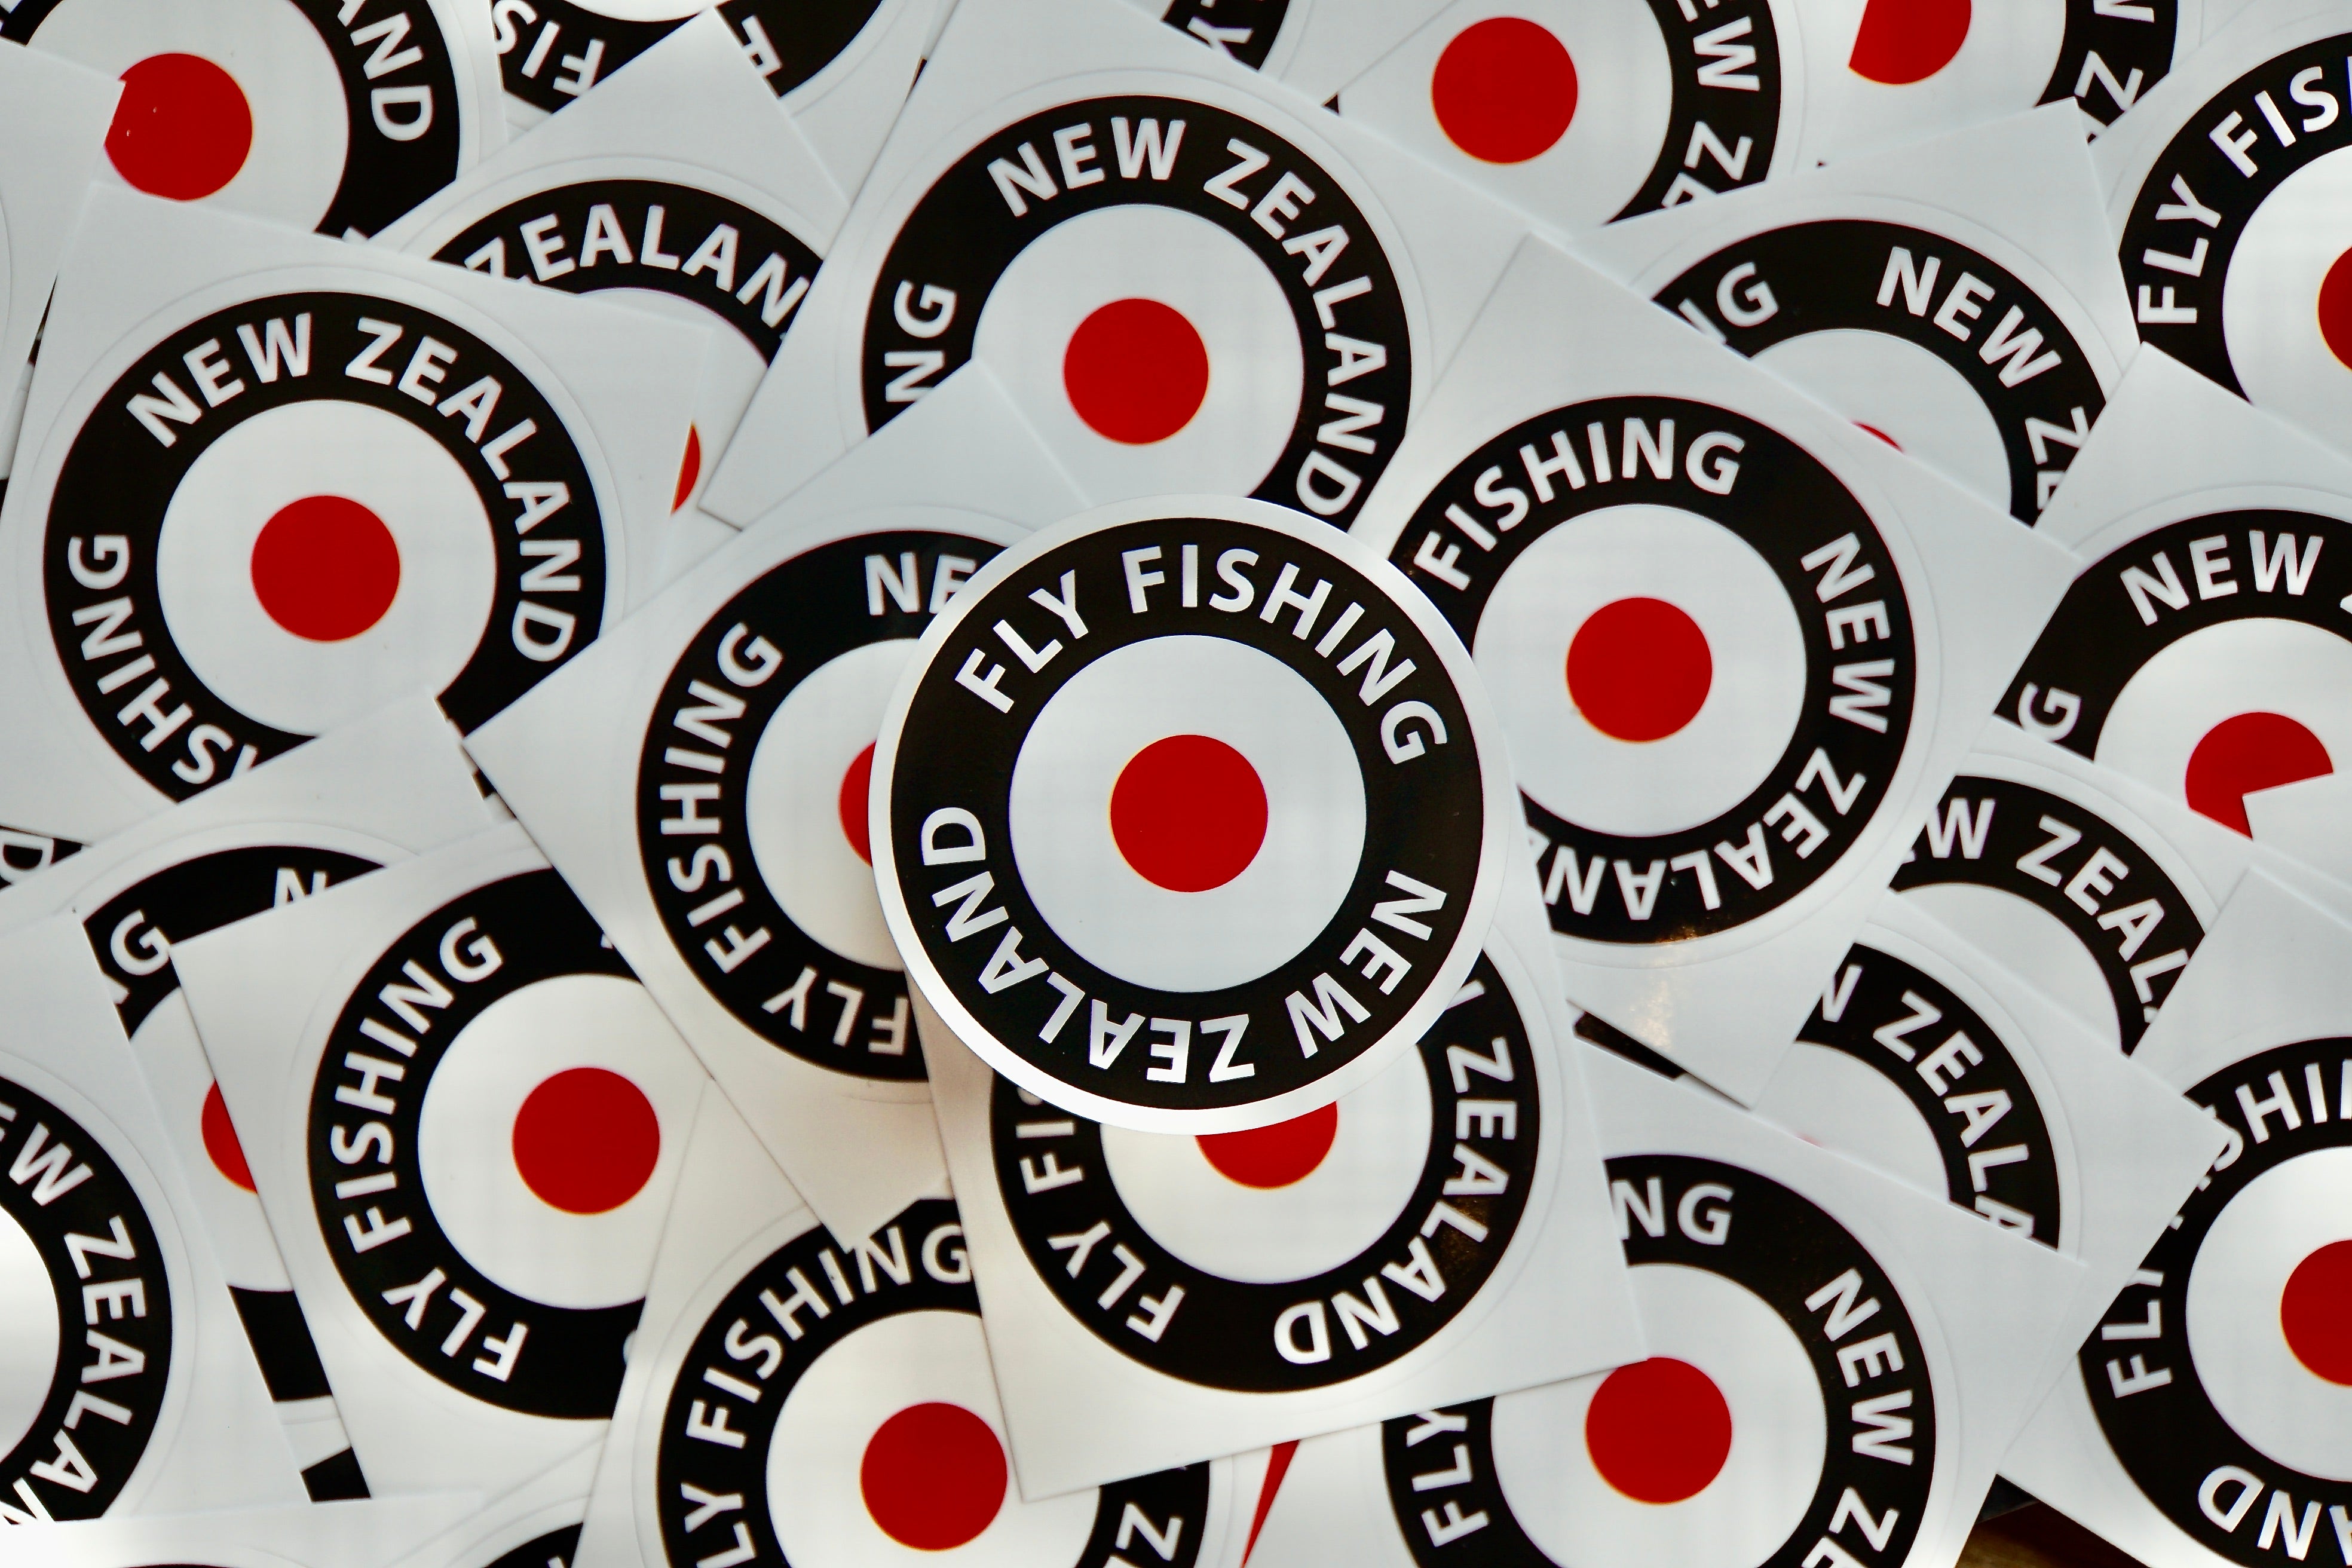 New Zealand Fly Fishing-Cool Sticker